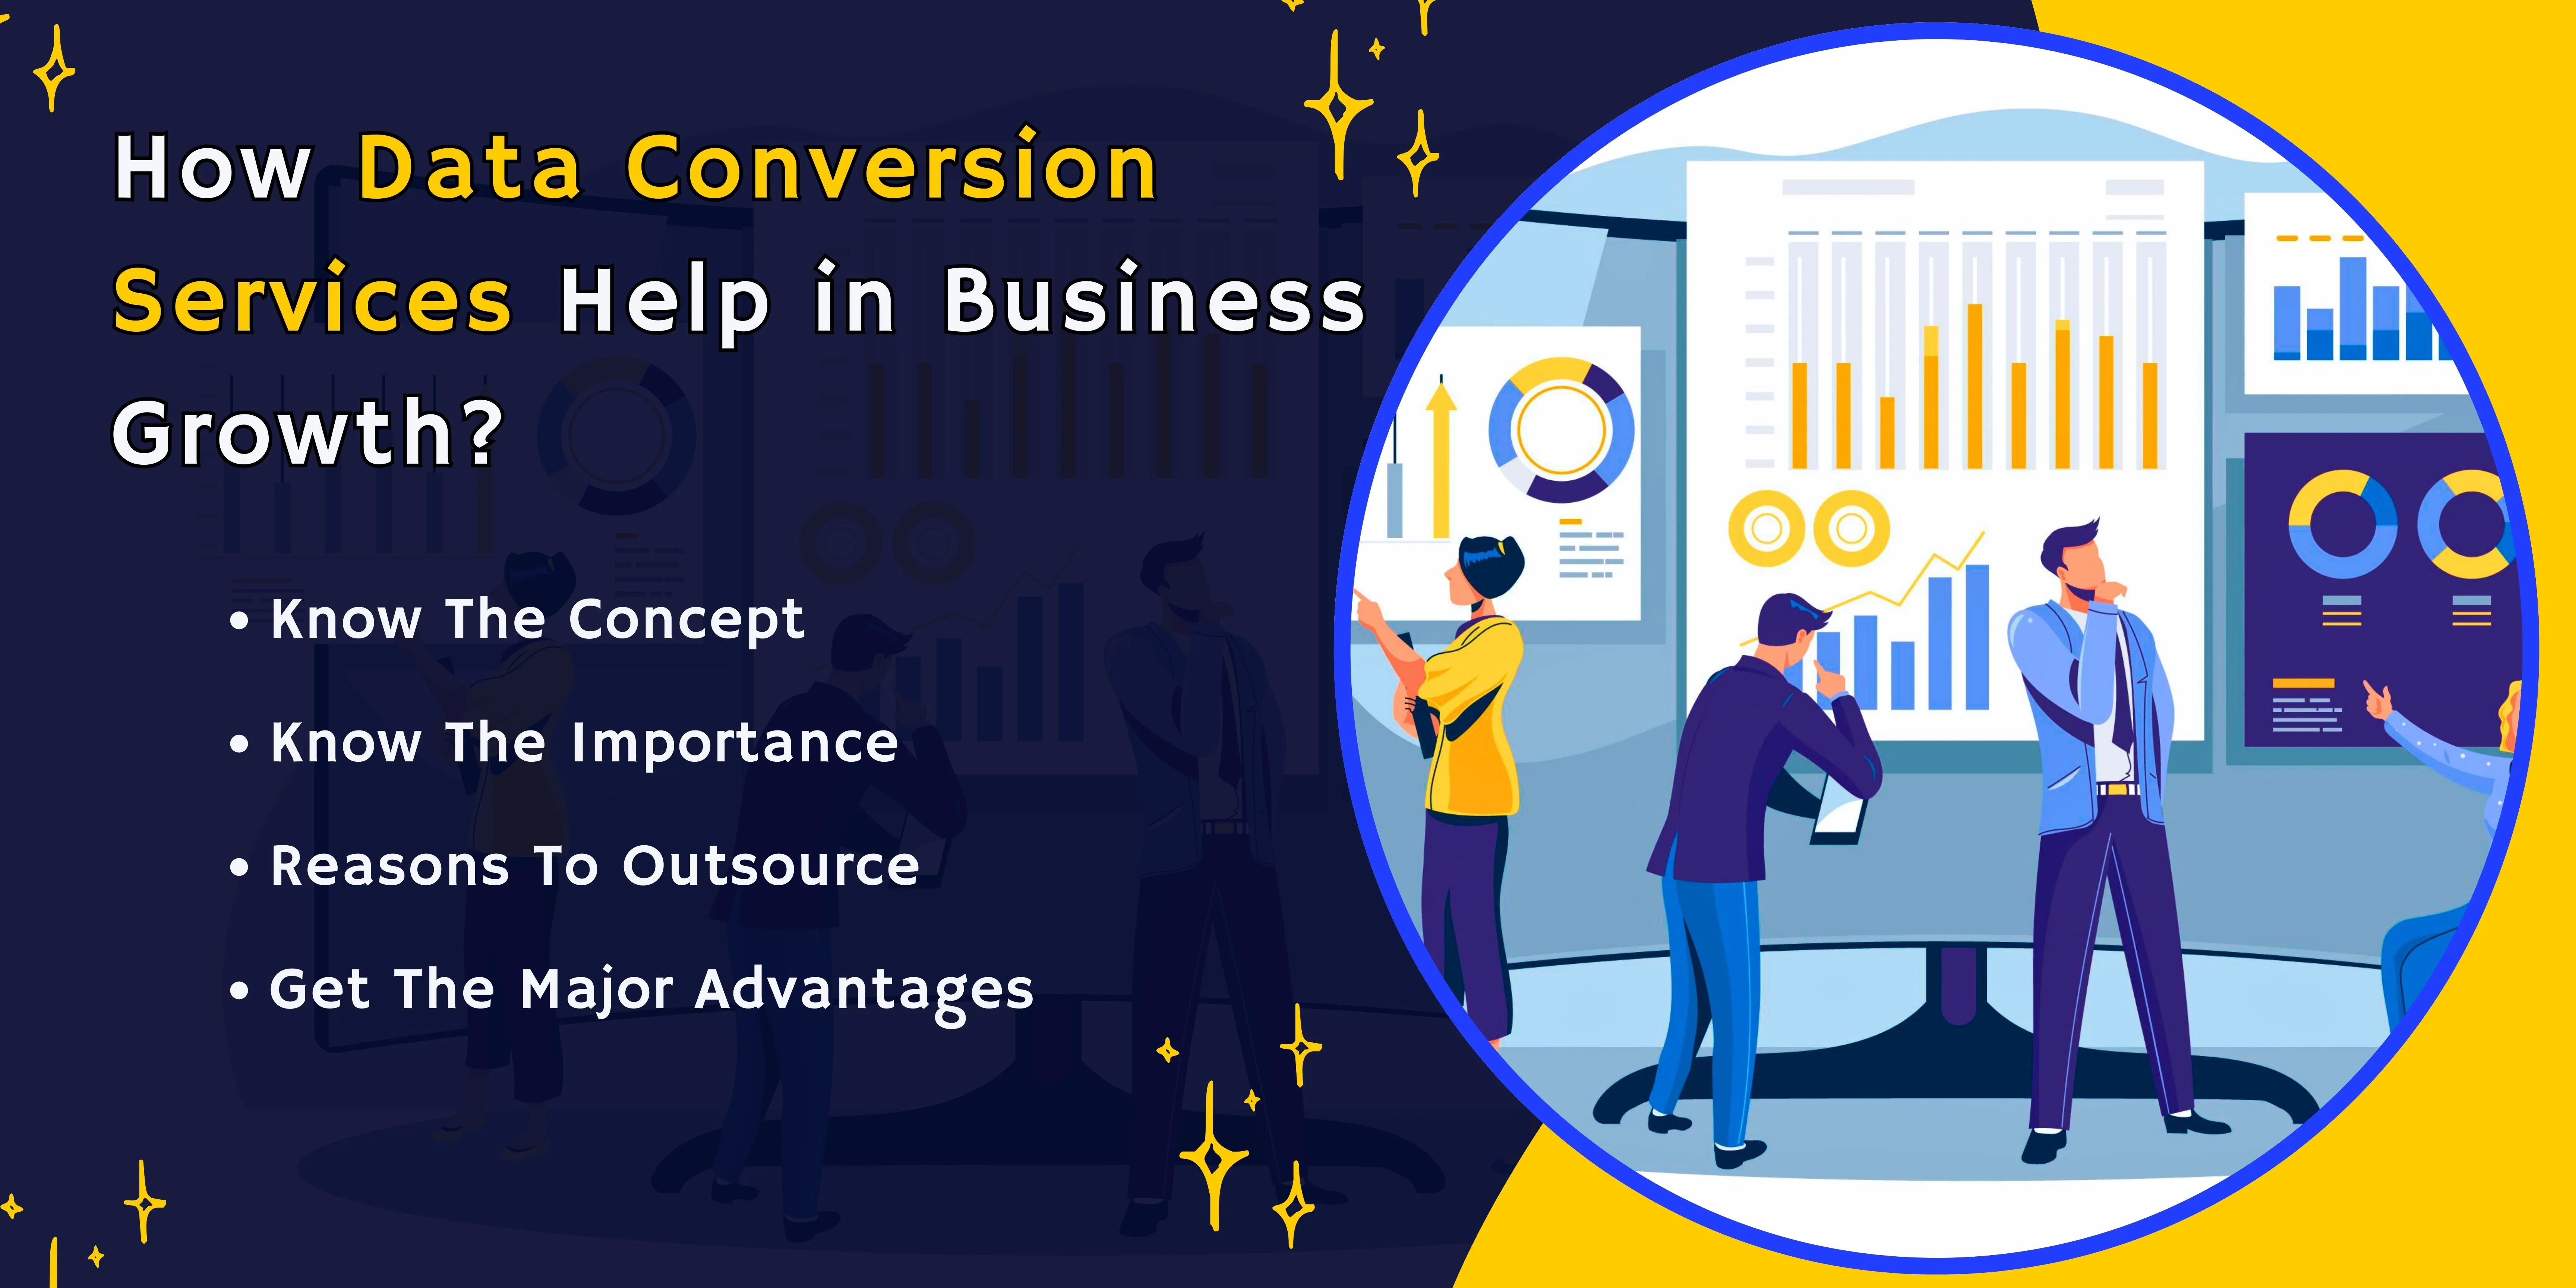 Outsourcing-Data Conversion Services: Key Benefits